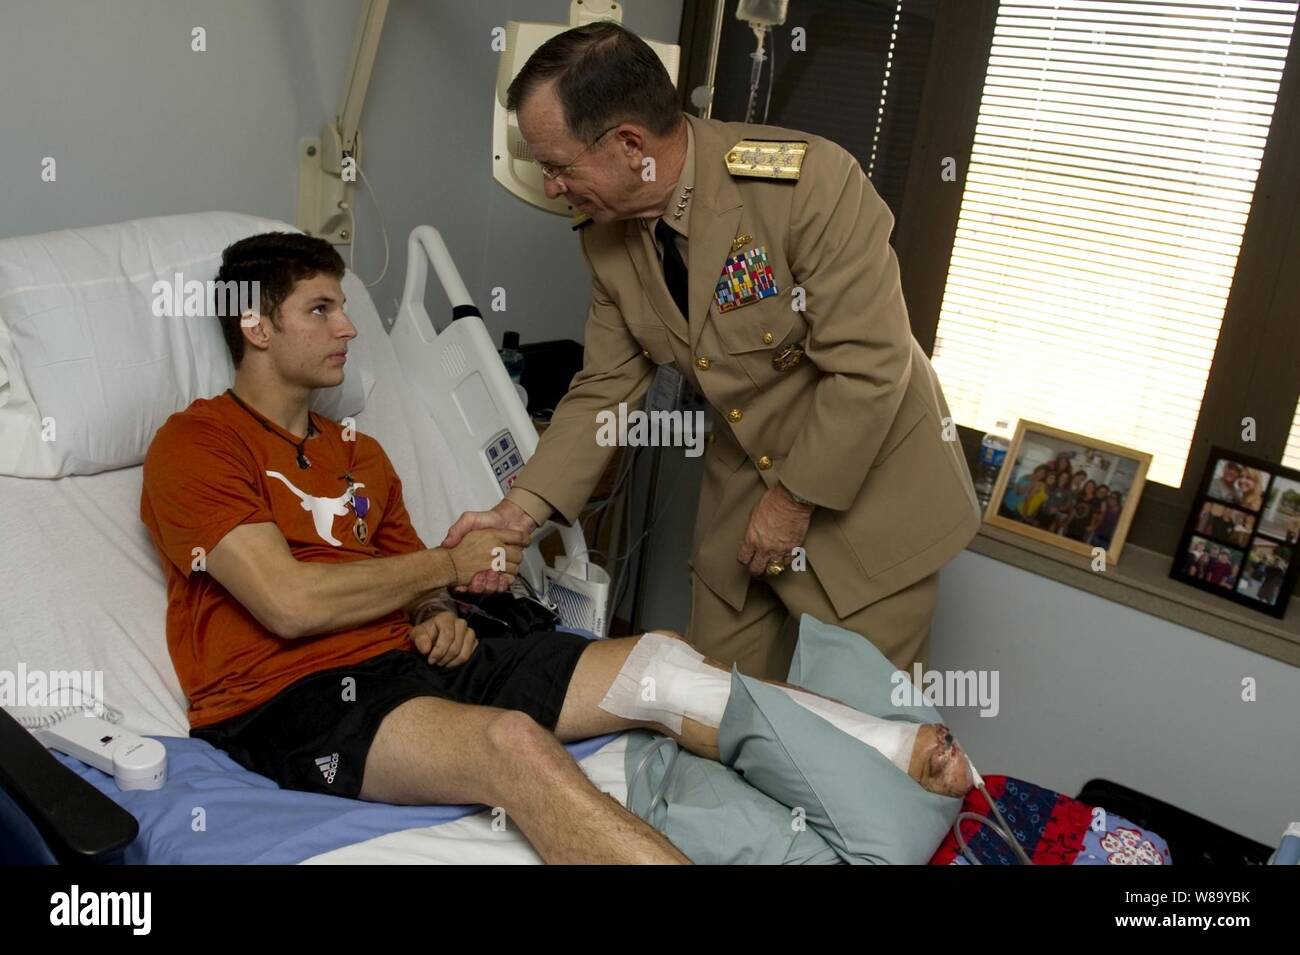 Chairman of the Joint Chiefs of Staff Adm. Mike Mullen, U.S. Navy, presents U.S. Army Spc. David R. Reid III with the Purple Heart during a visit to Brooke Army Medical Center in San Antonio, Texas, on Sept. 30, 2010.  Reid, a Ranger assigned to the 75th Ranger Regiment, sustained his injuries on Sept. 20 when he stepped on a pressure plate improvised explosive device during combat operations in Afghanistan. Stock Photo